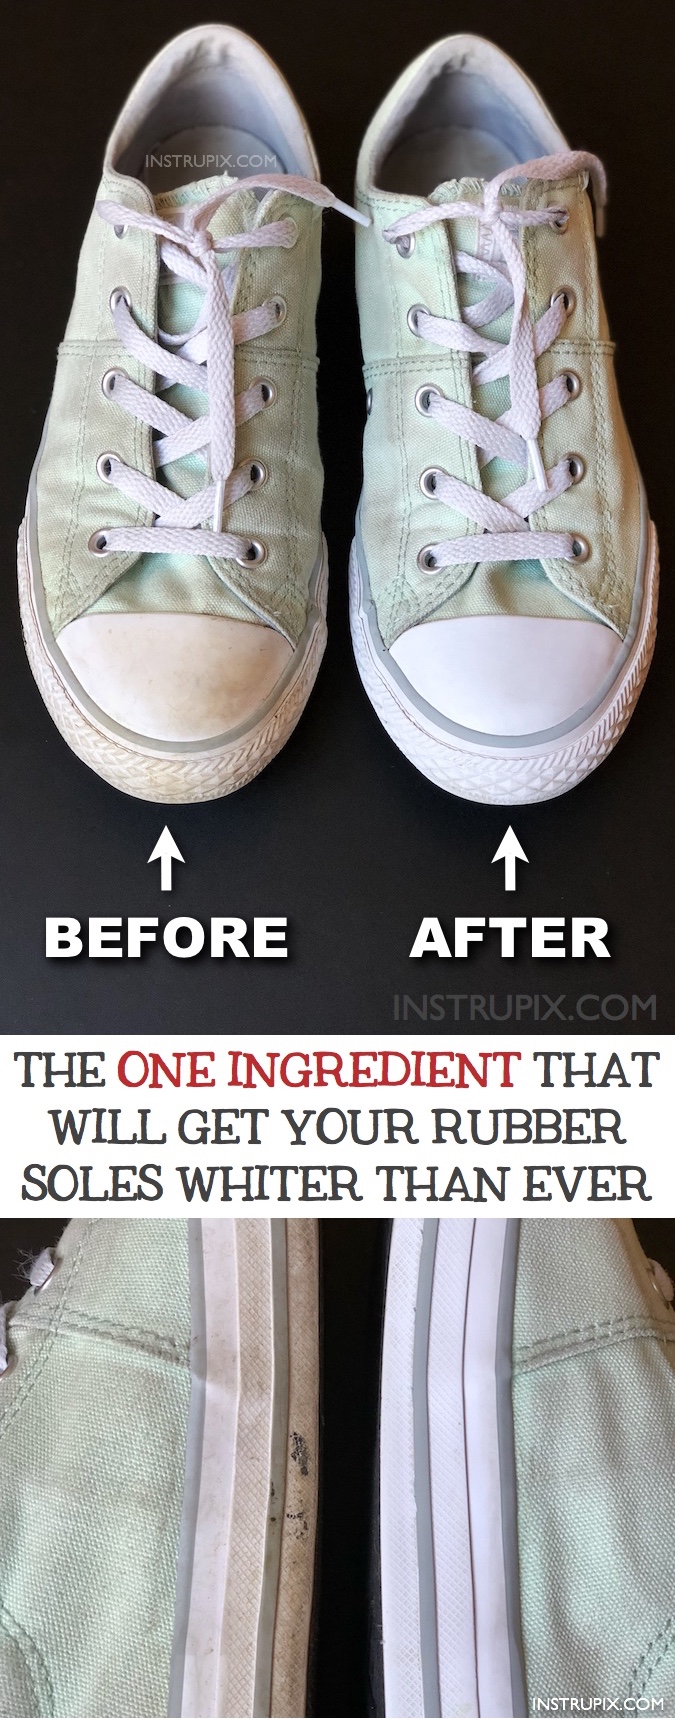 How To Clean Rubber On Shoes How To Clean Converse Like Magic (or any rubber soles!)